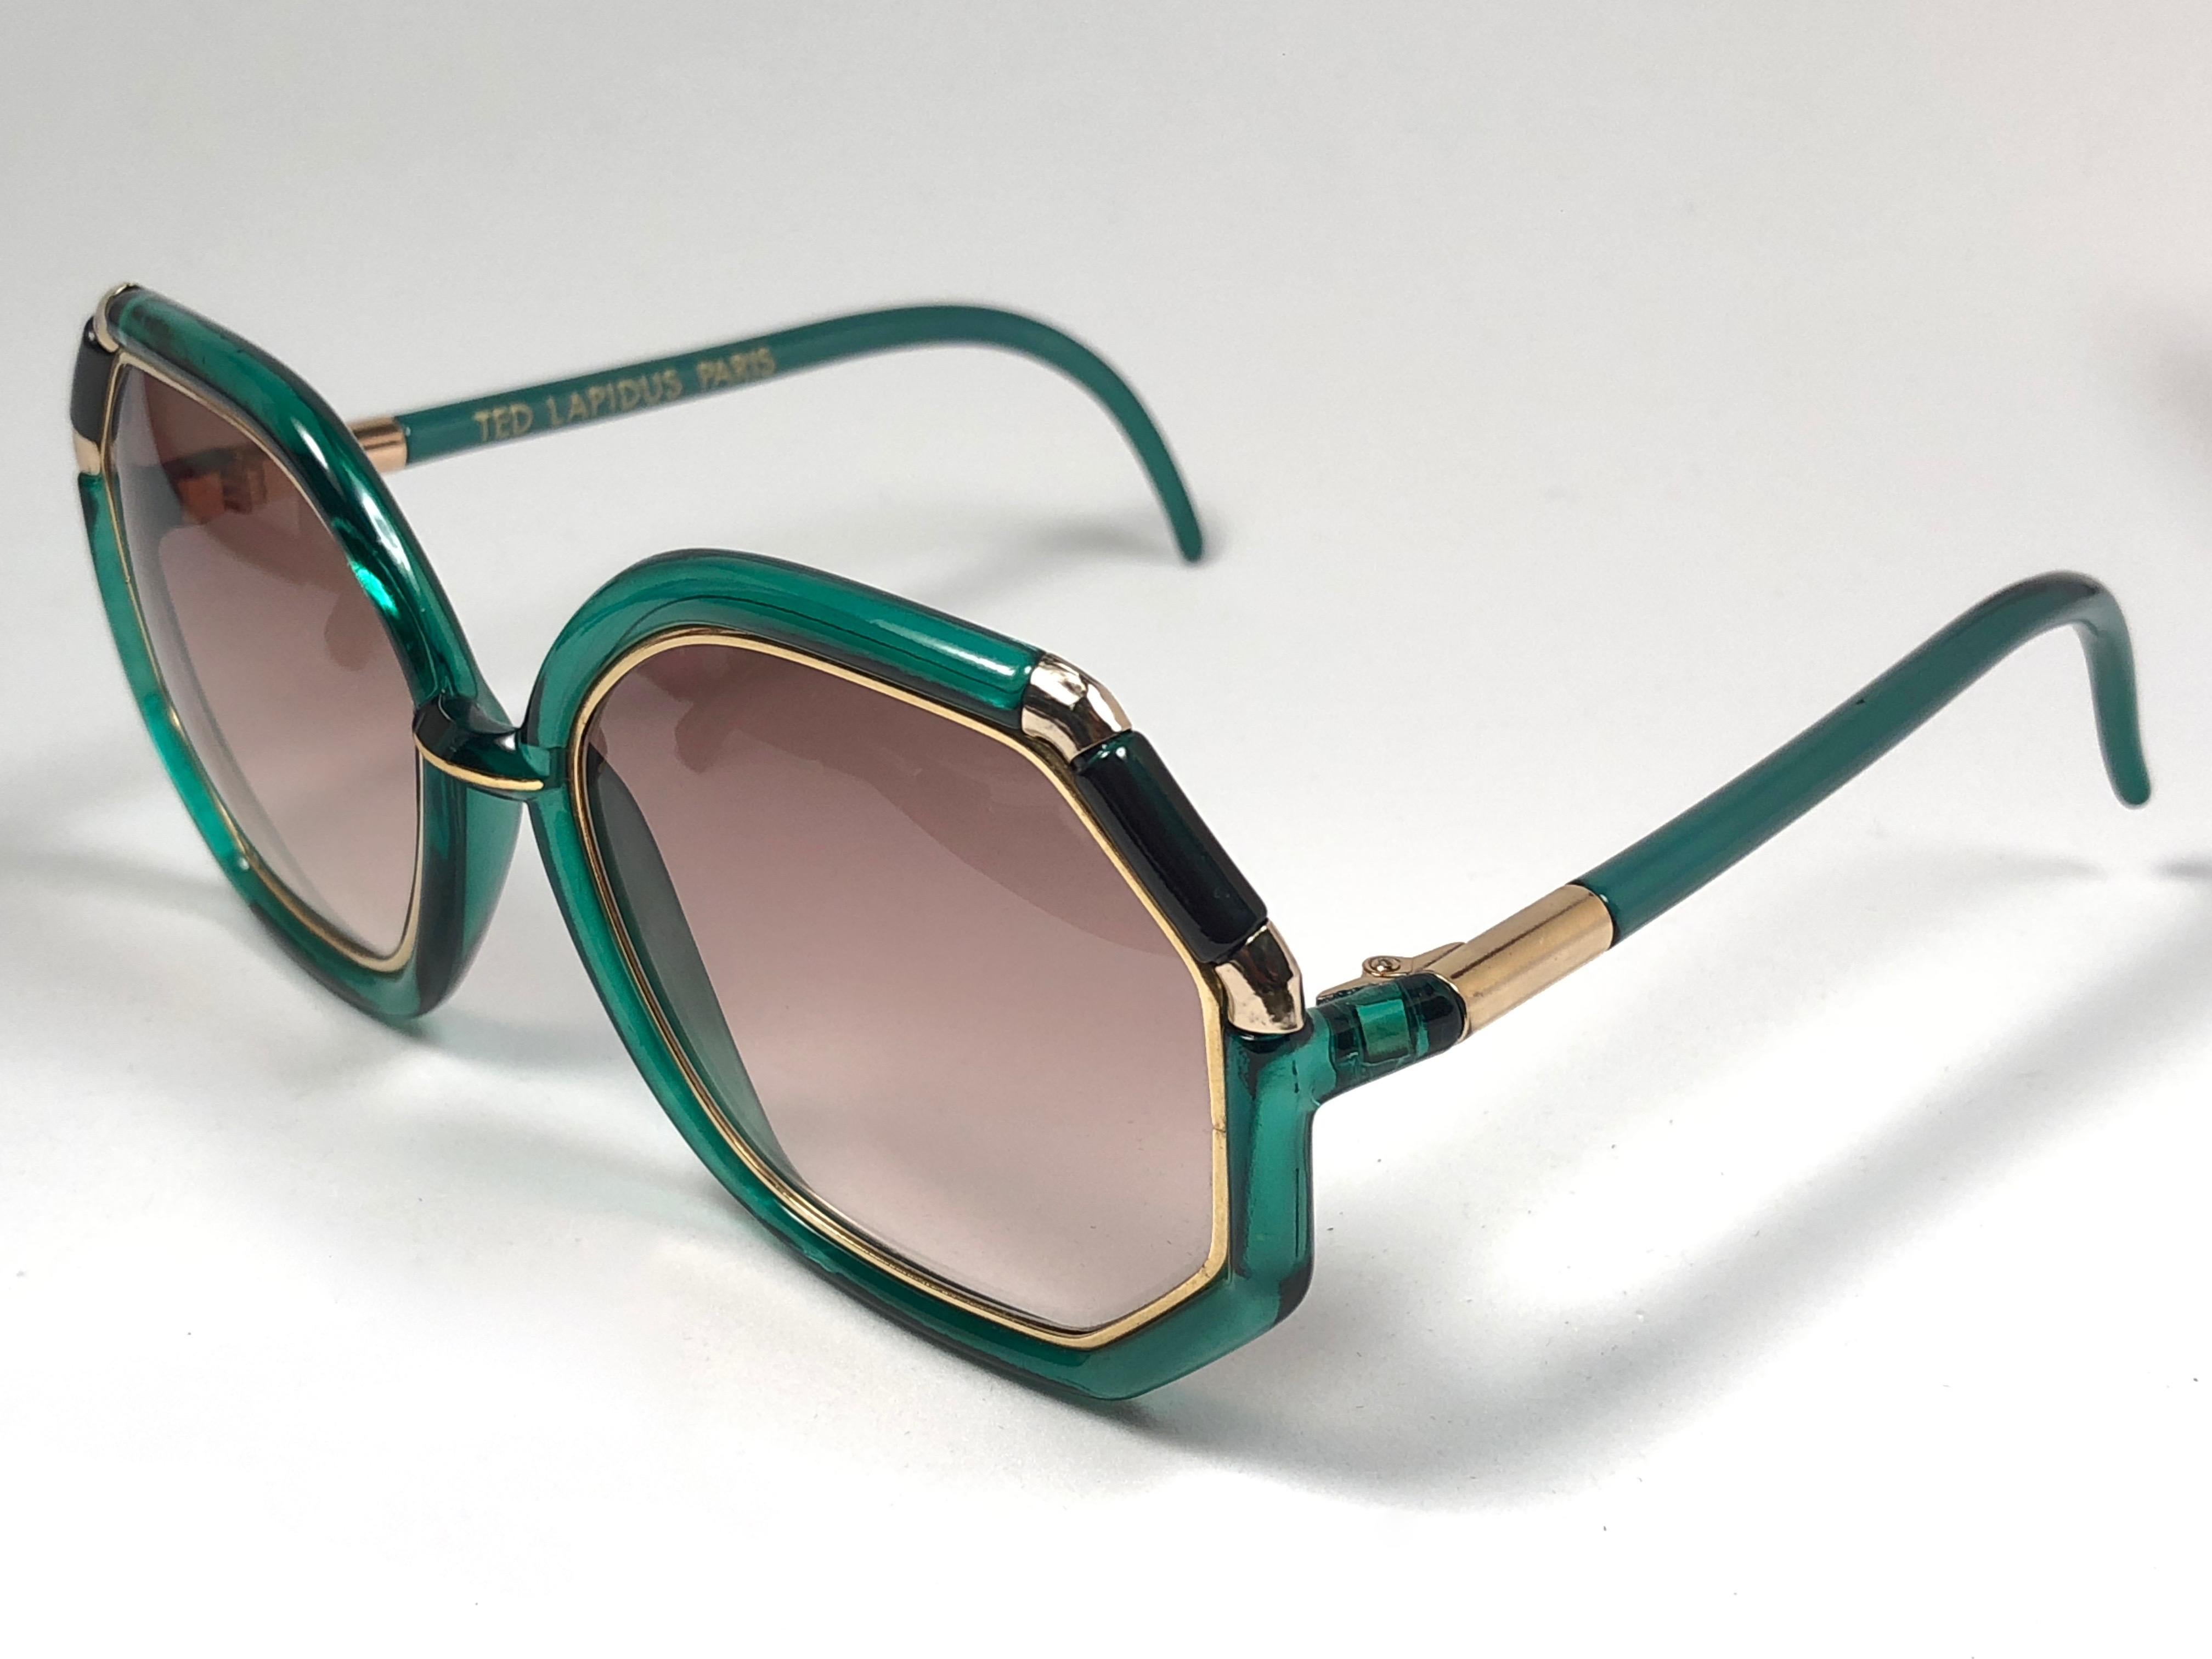 New Vintage Ted Lapidus jade green & gold frame with spotless lenses.  
Made in Paris.  
Produced and design in 1970's.  
This pair could show minor sign of wear due to storage.
New, never worn or displayed.